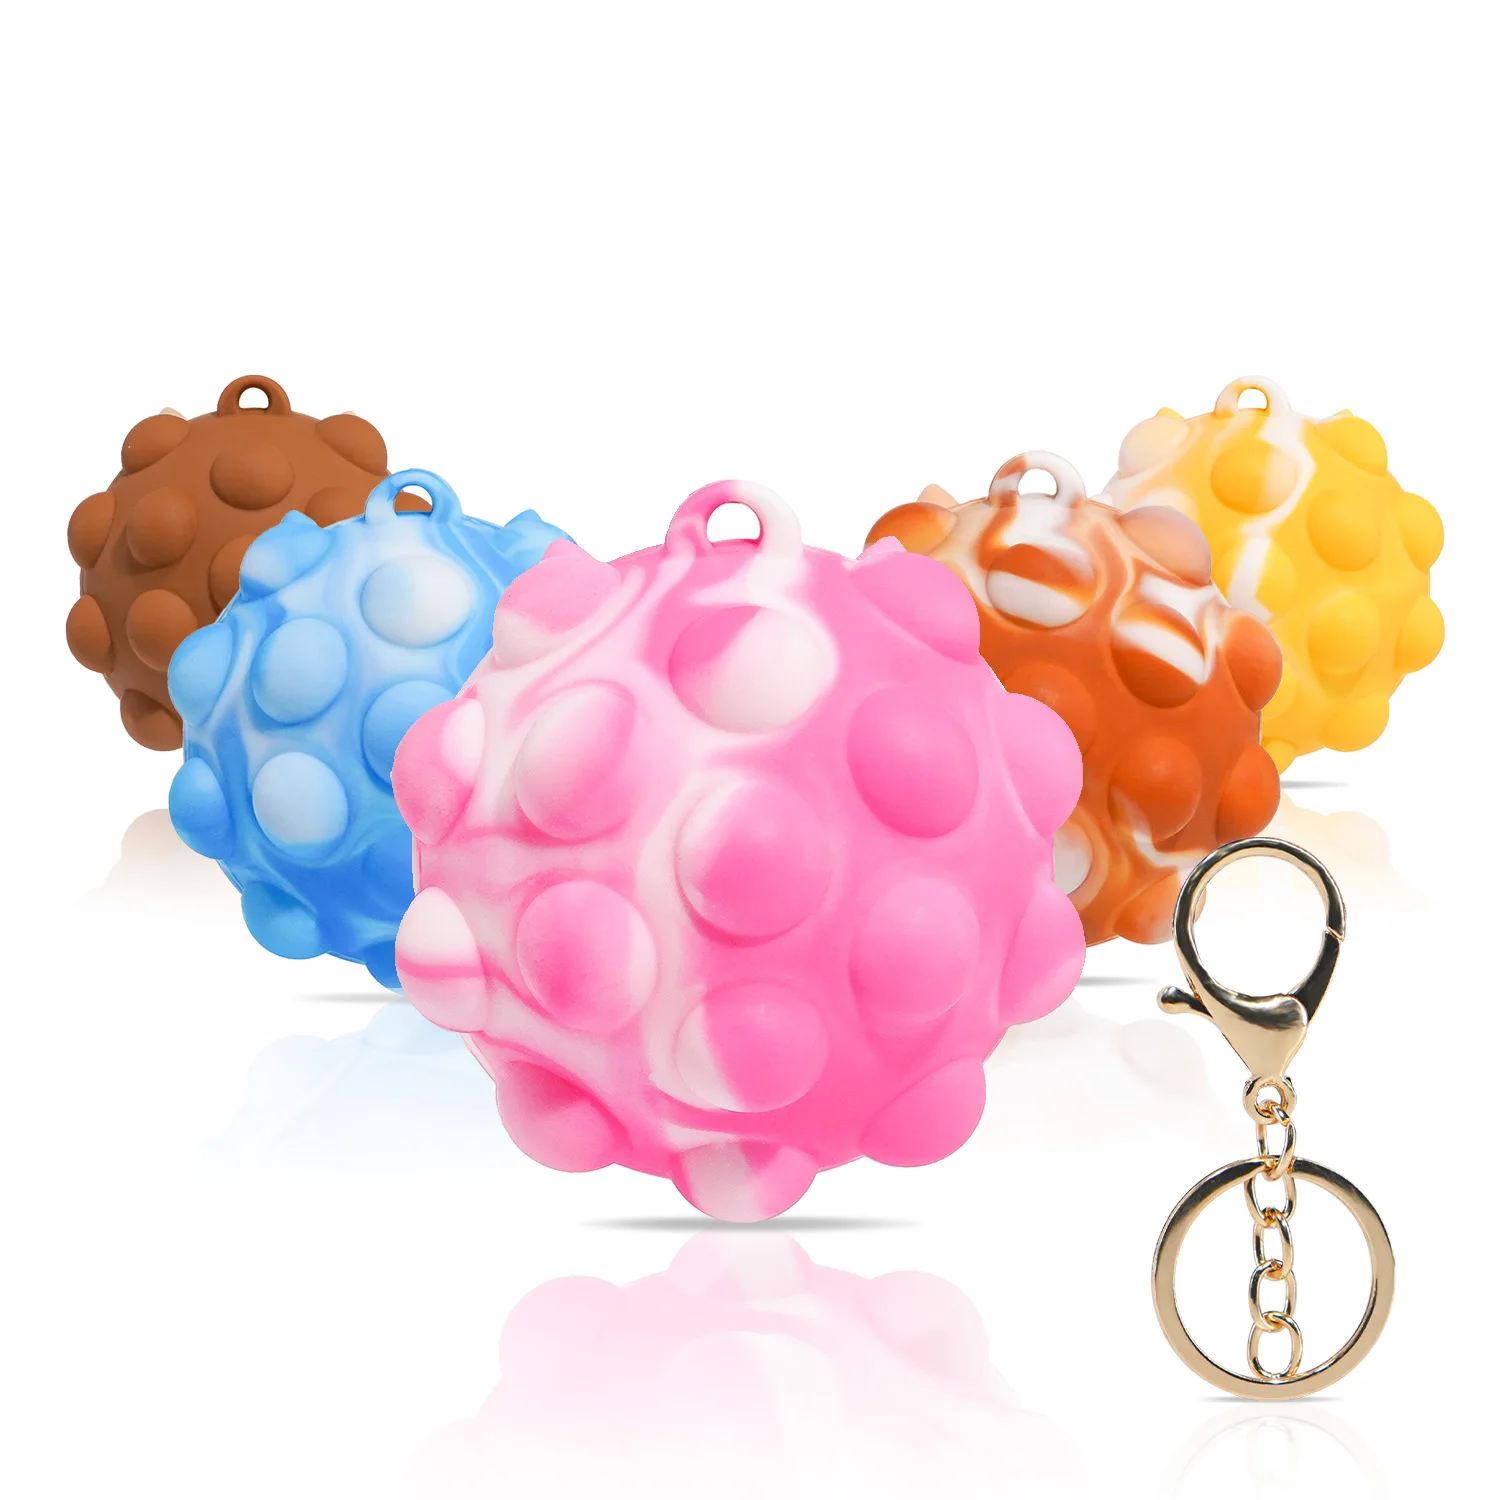 New Color Rainbow 3D Hedgehog Stress Balls Fidget Toy Silicone Popping Push it Bubble Fidget Ball Mesh Squish Stress Relief Ball